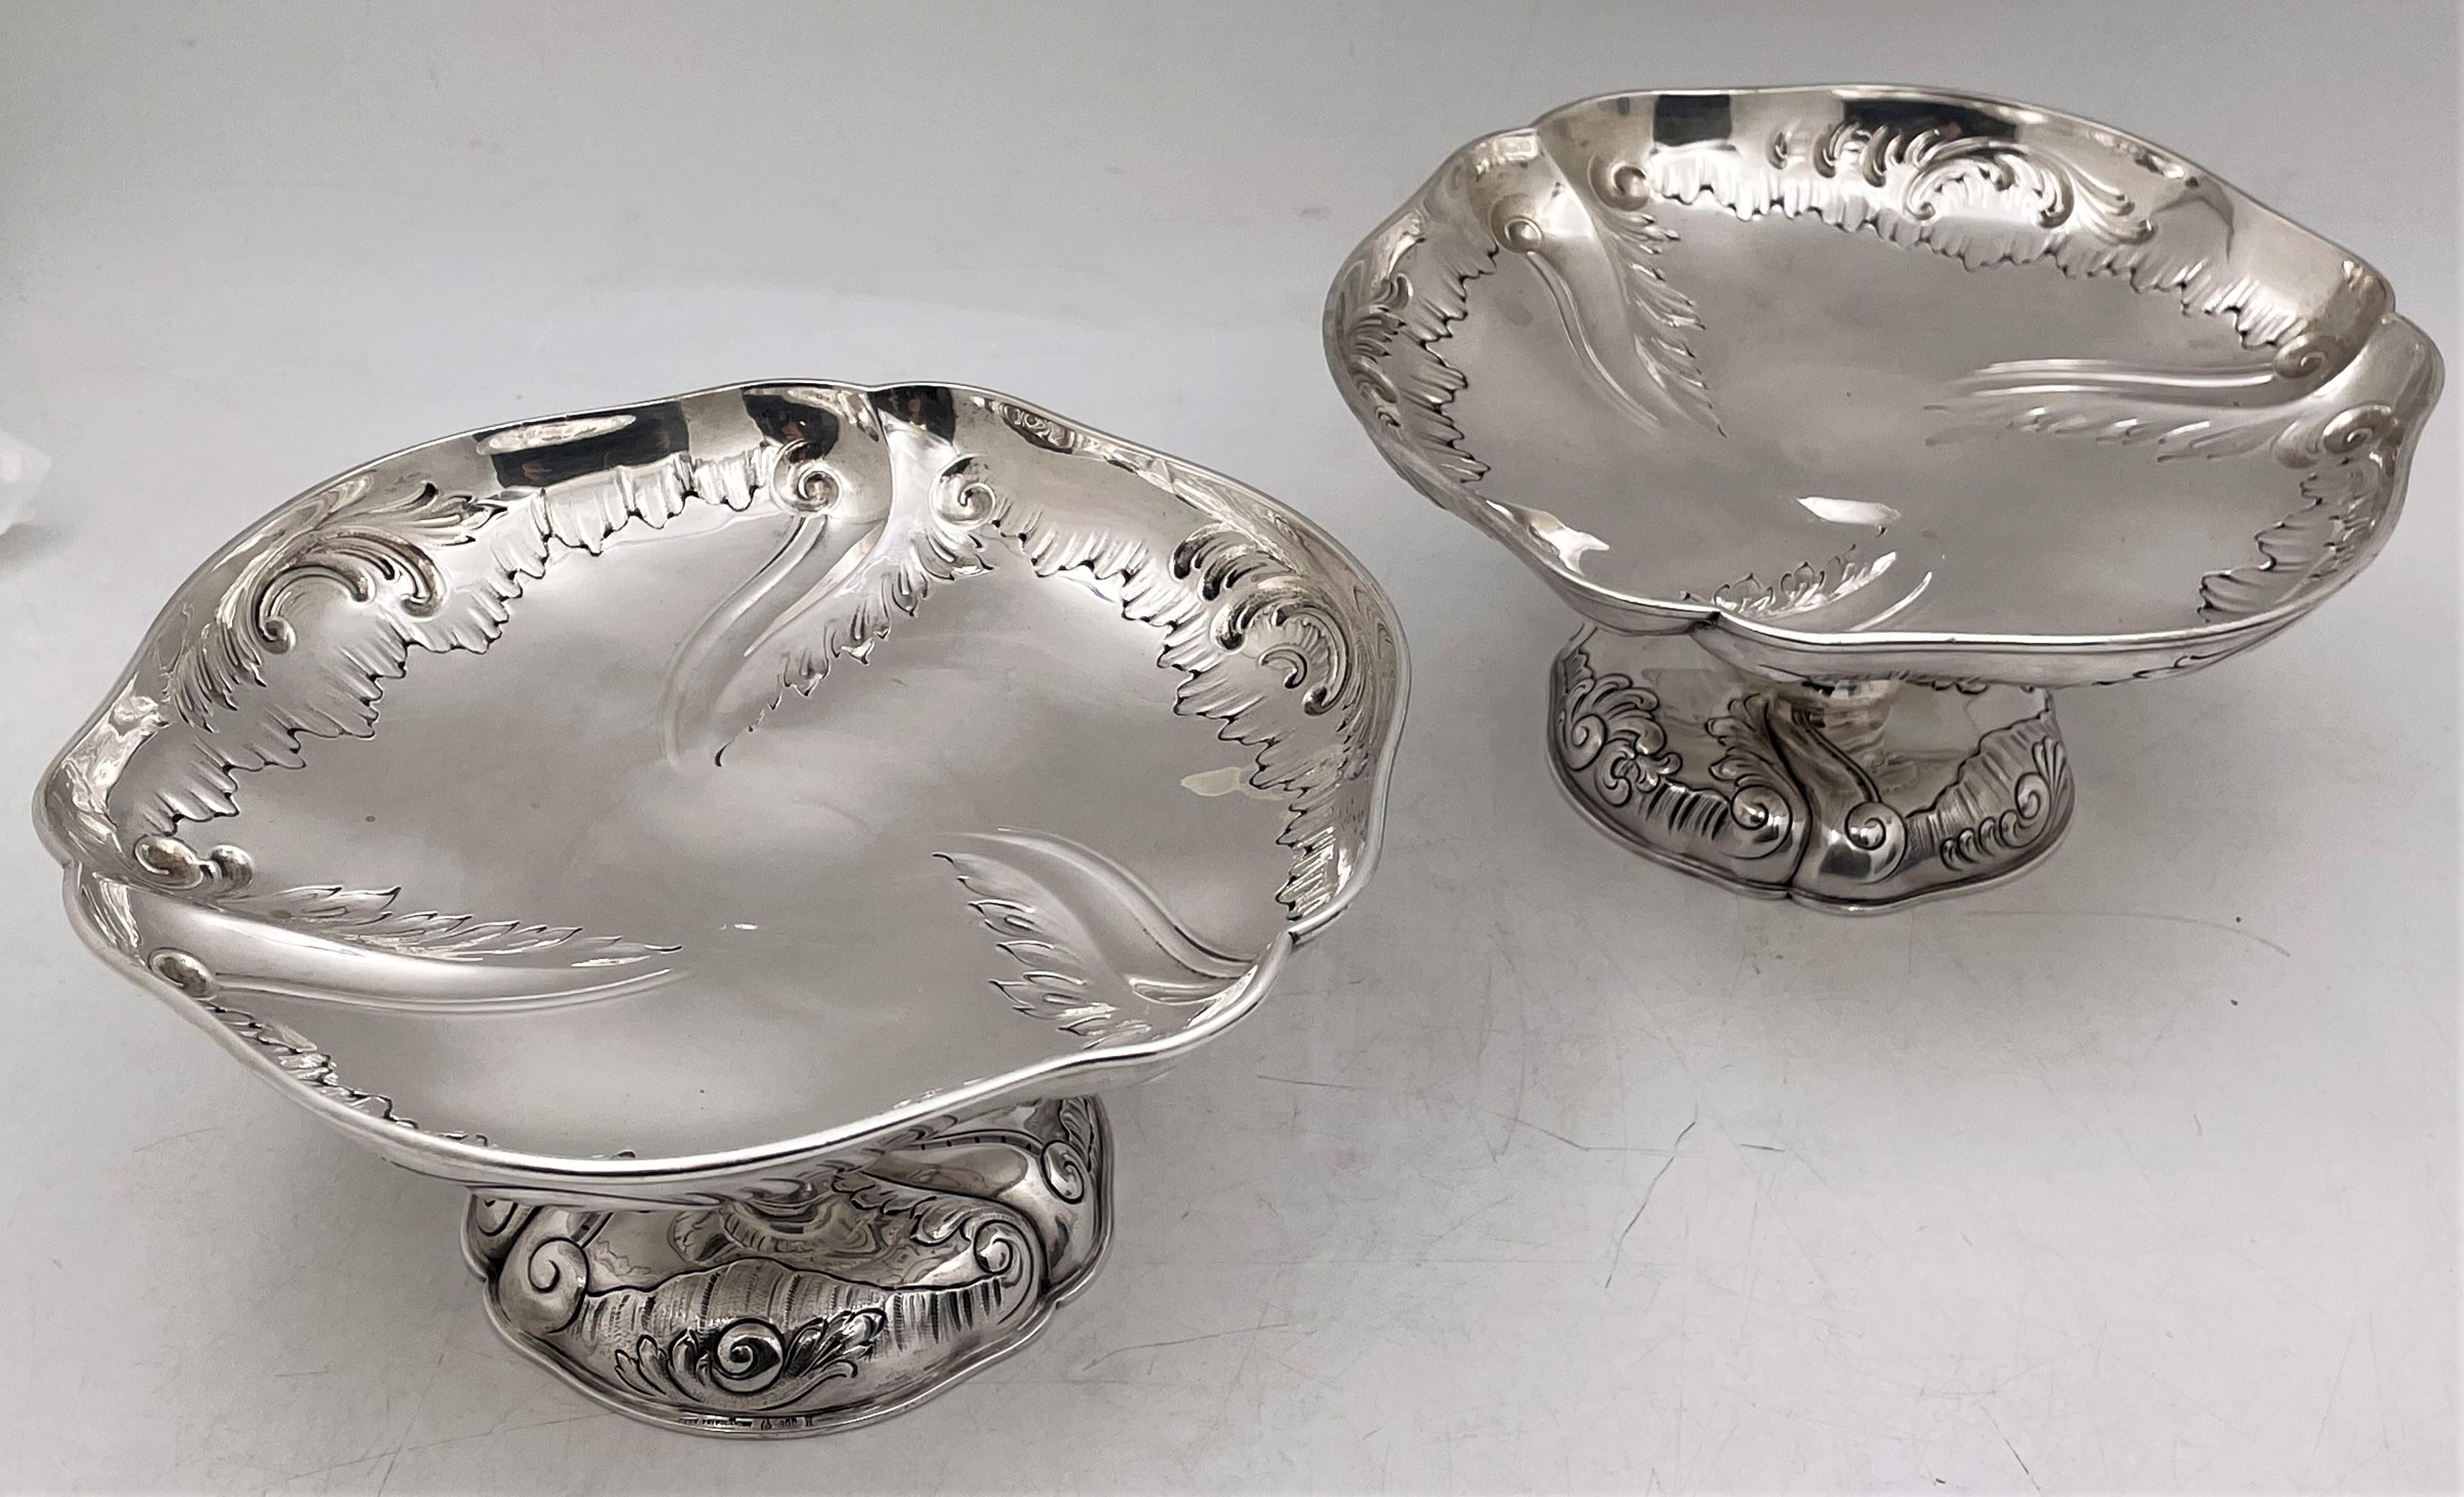 Pair of German, continental silver tazza or footed bowl by prestigious royal maker Gebrüder Friedländer, from the late 19th century, with flowing, stylized, scroll and foliate motifs in Rococo style adorning the rim and body of these elegant,